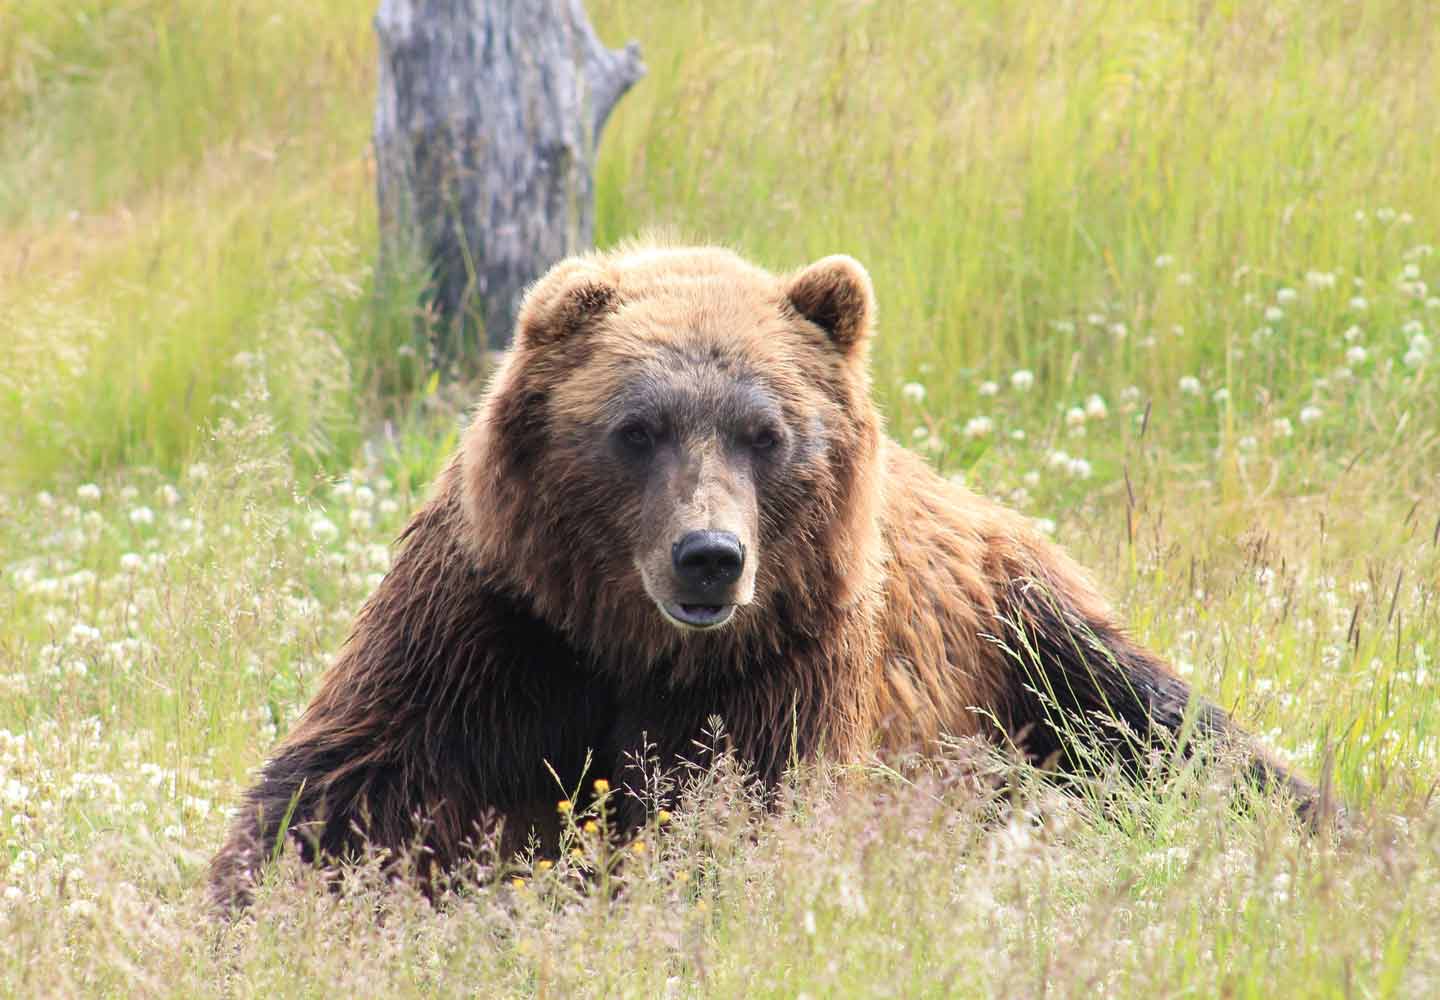 Head over to Fortress of the Bears for an up close view of Alaska's most famous animal.